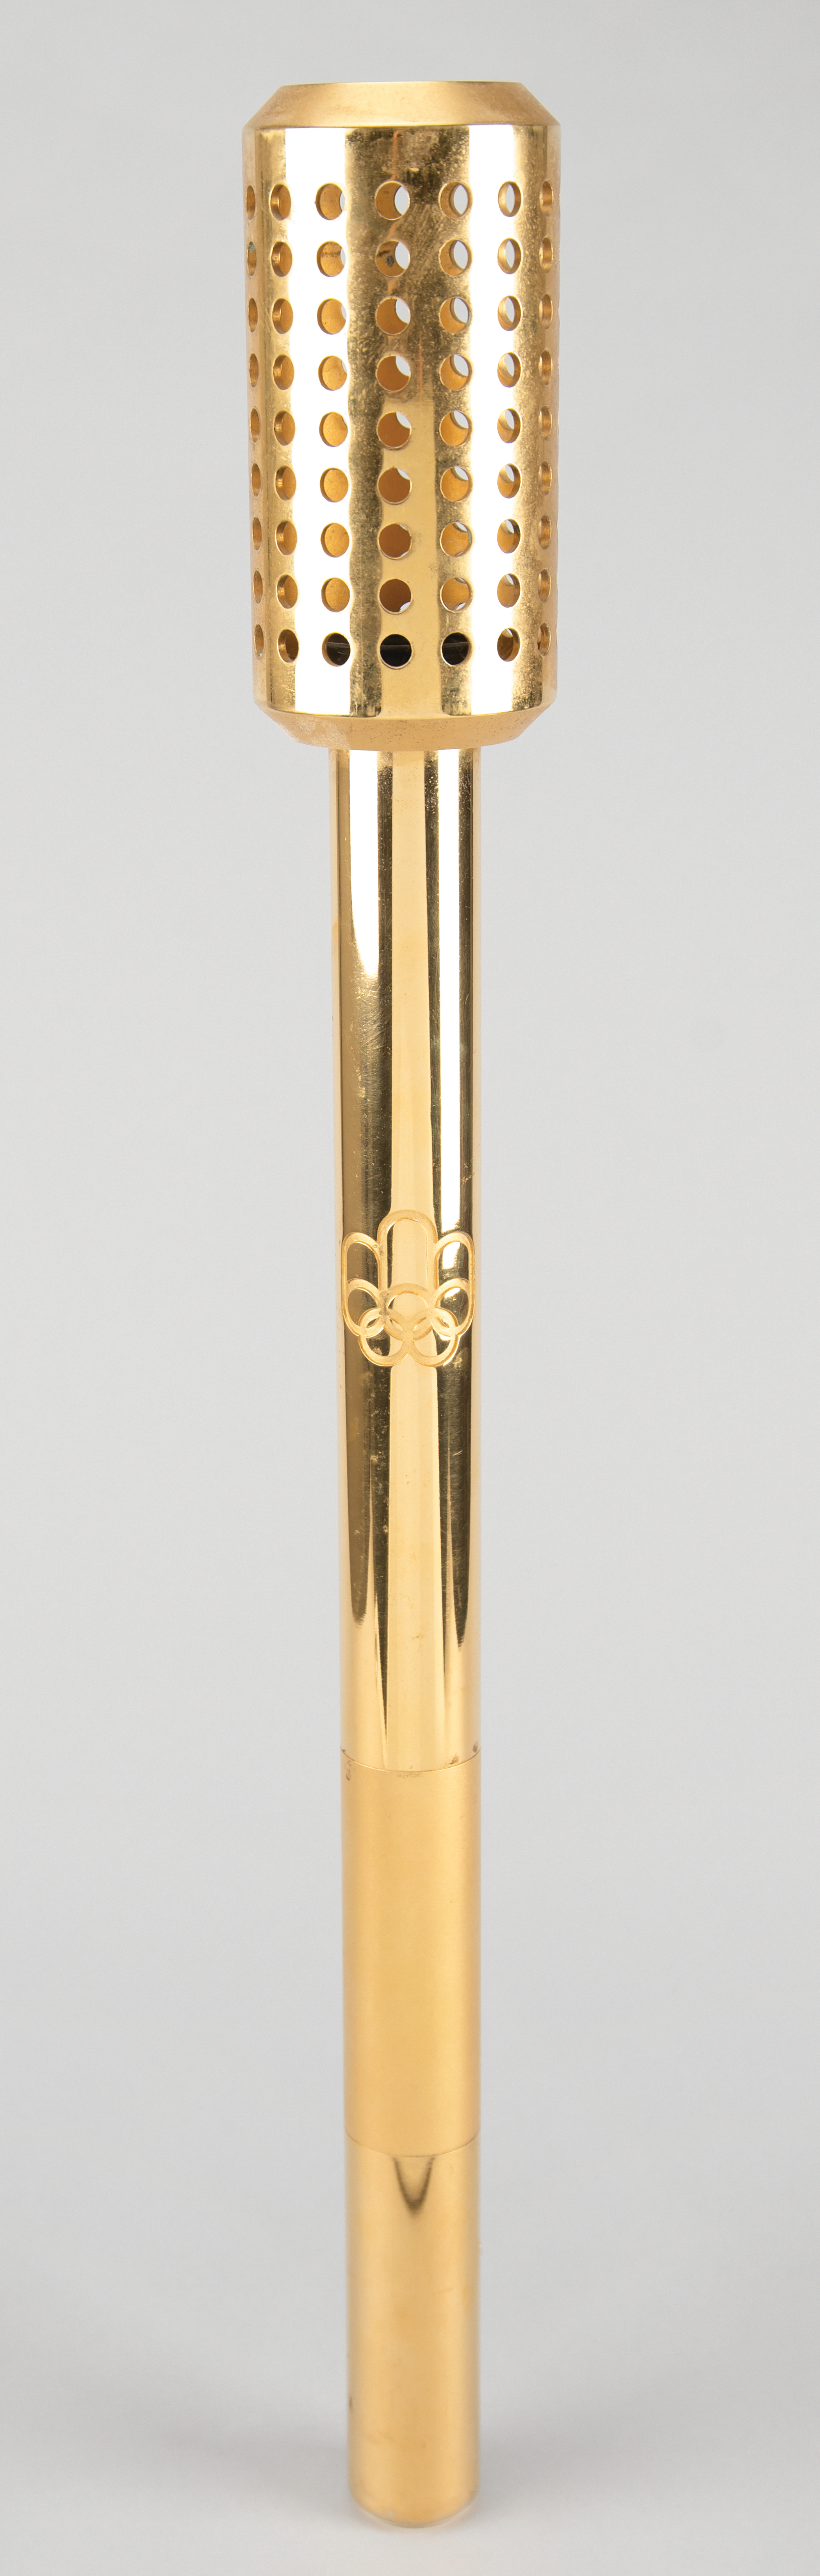 Lot #3012 Montreal 1976 Summer Olympics Gold-Plated Presentation Torch - Image 1